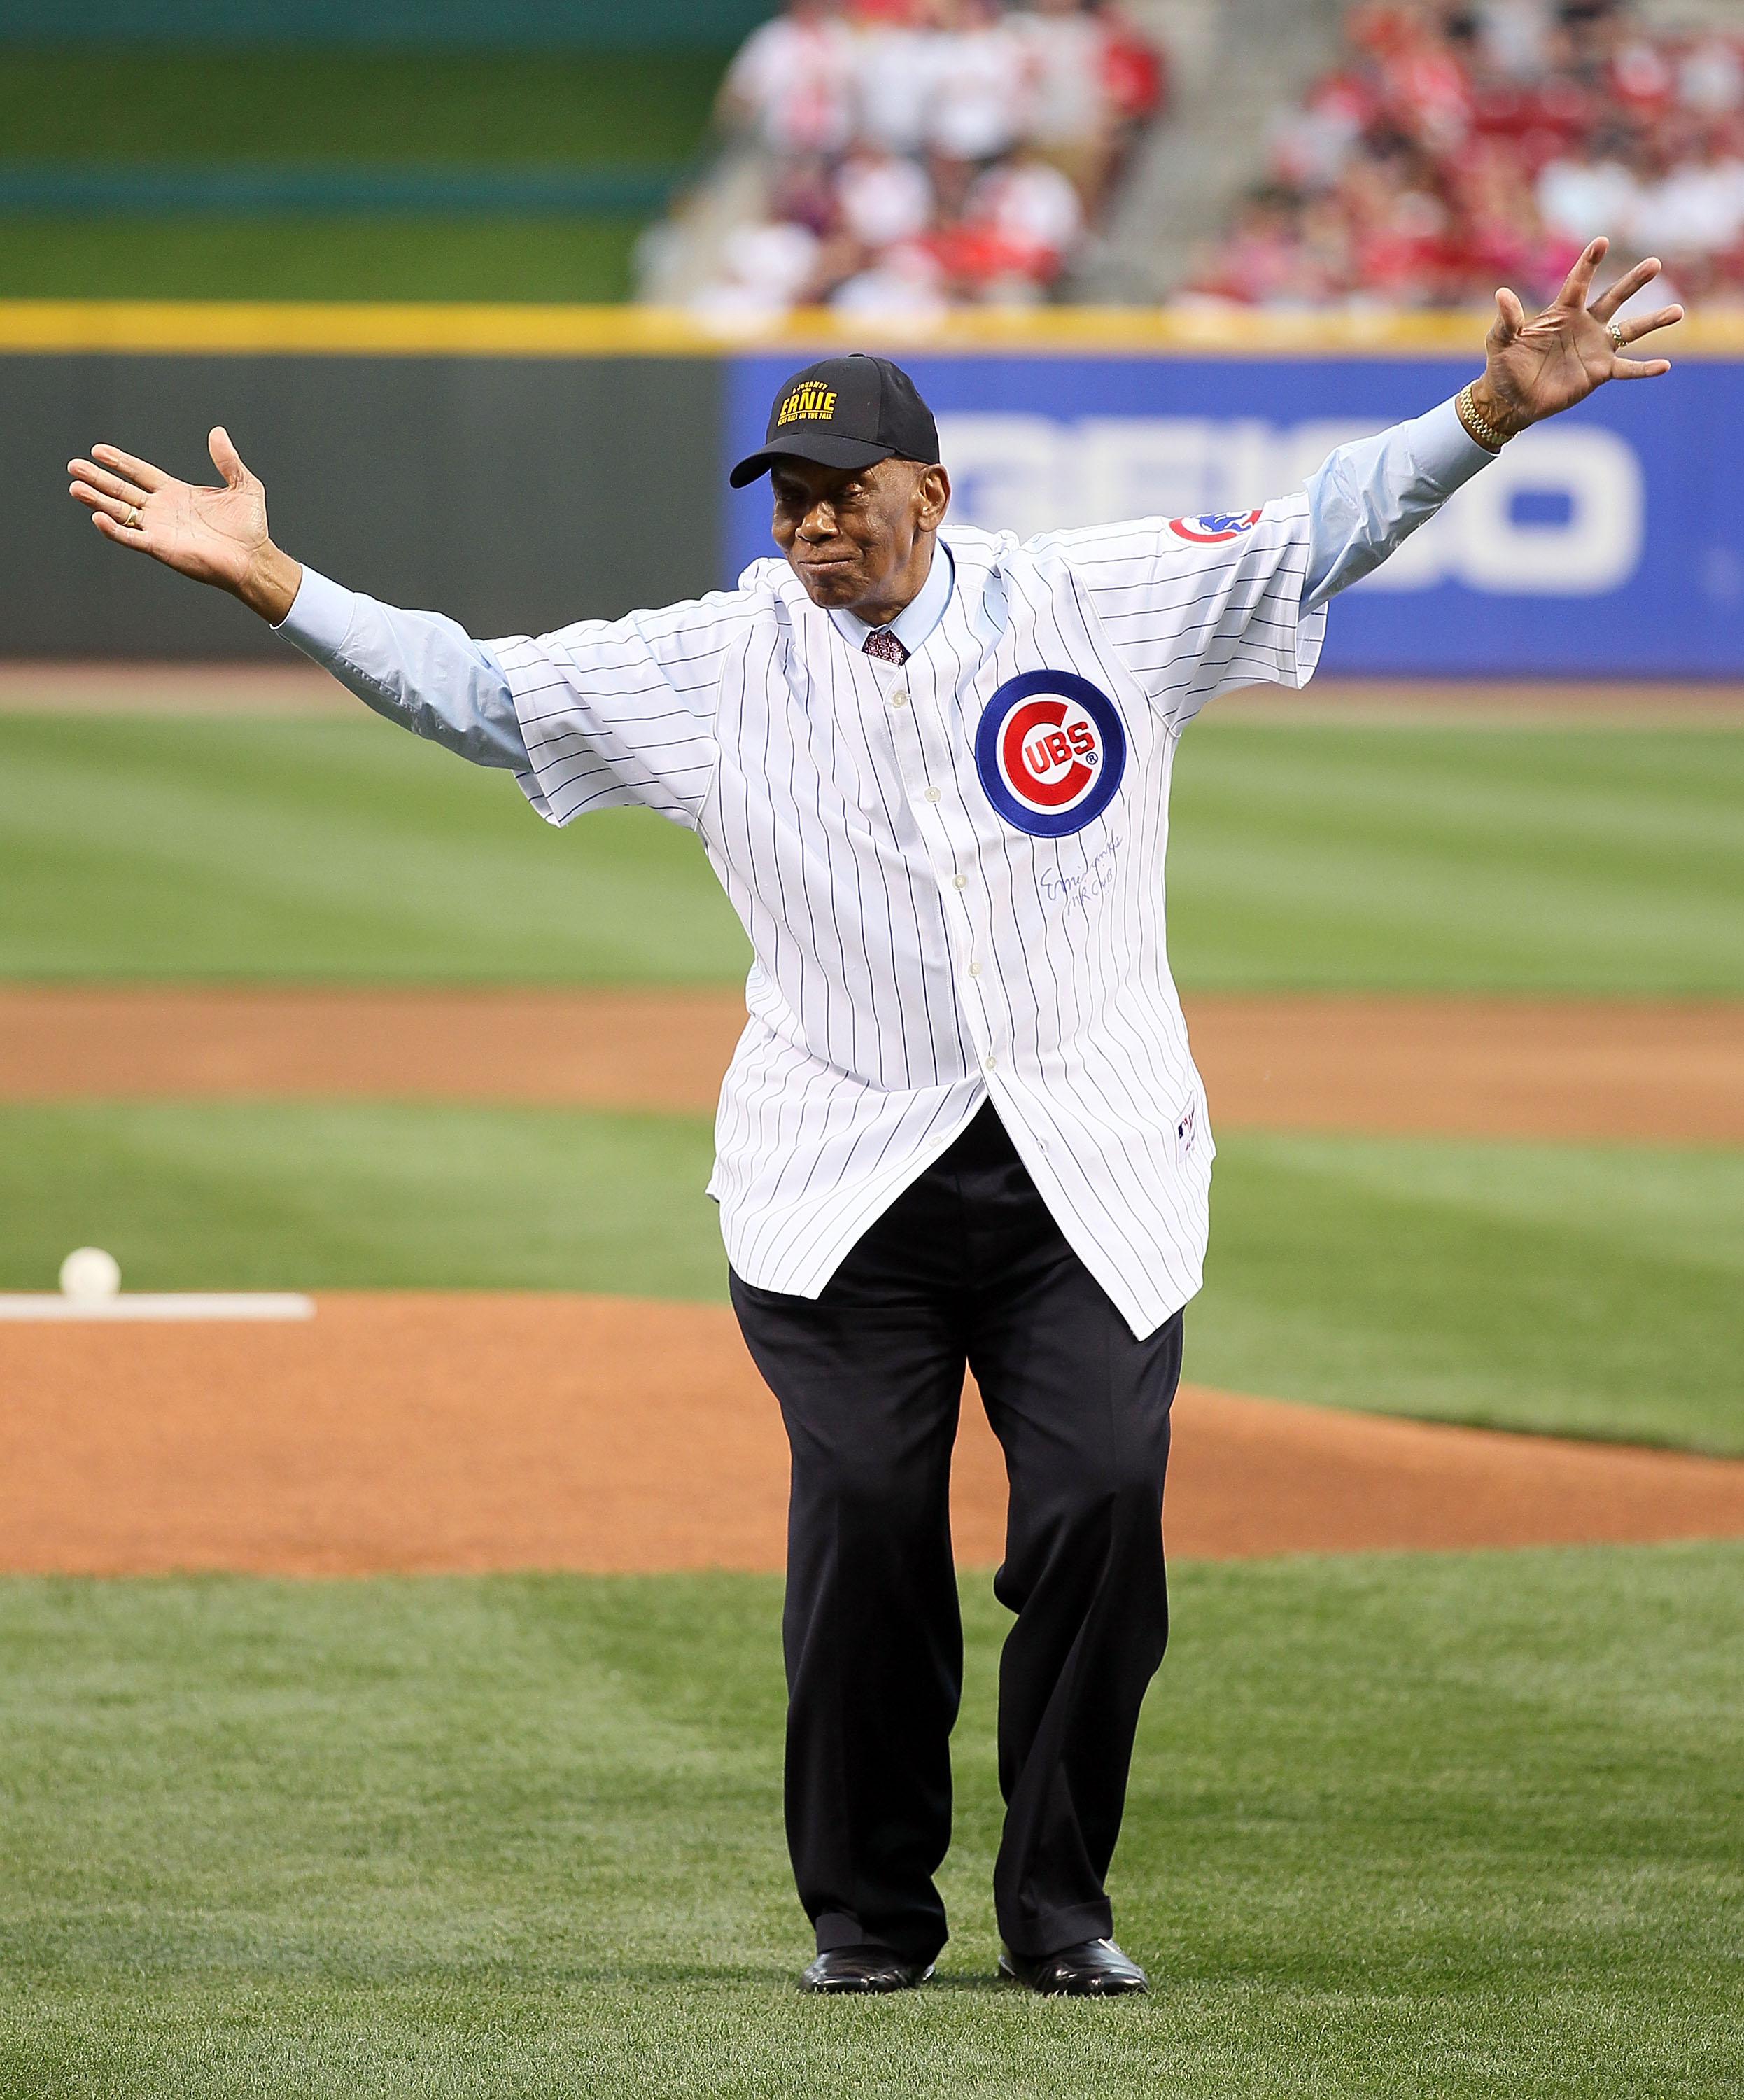 CINCINNATI - MAY 15:  Ernie Banks waves to the crowd after throwing out the first pitch before the Gillette Civil Rights Game between the Cincinnati Reds and the St. Louis Cardinals at Great American Ball Park on May 15, 2010 in Cincinnati, Ohio.  (Photo